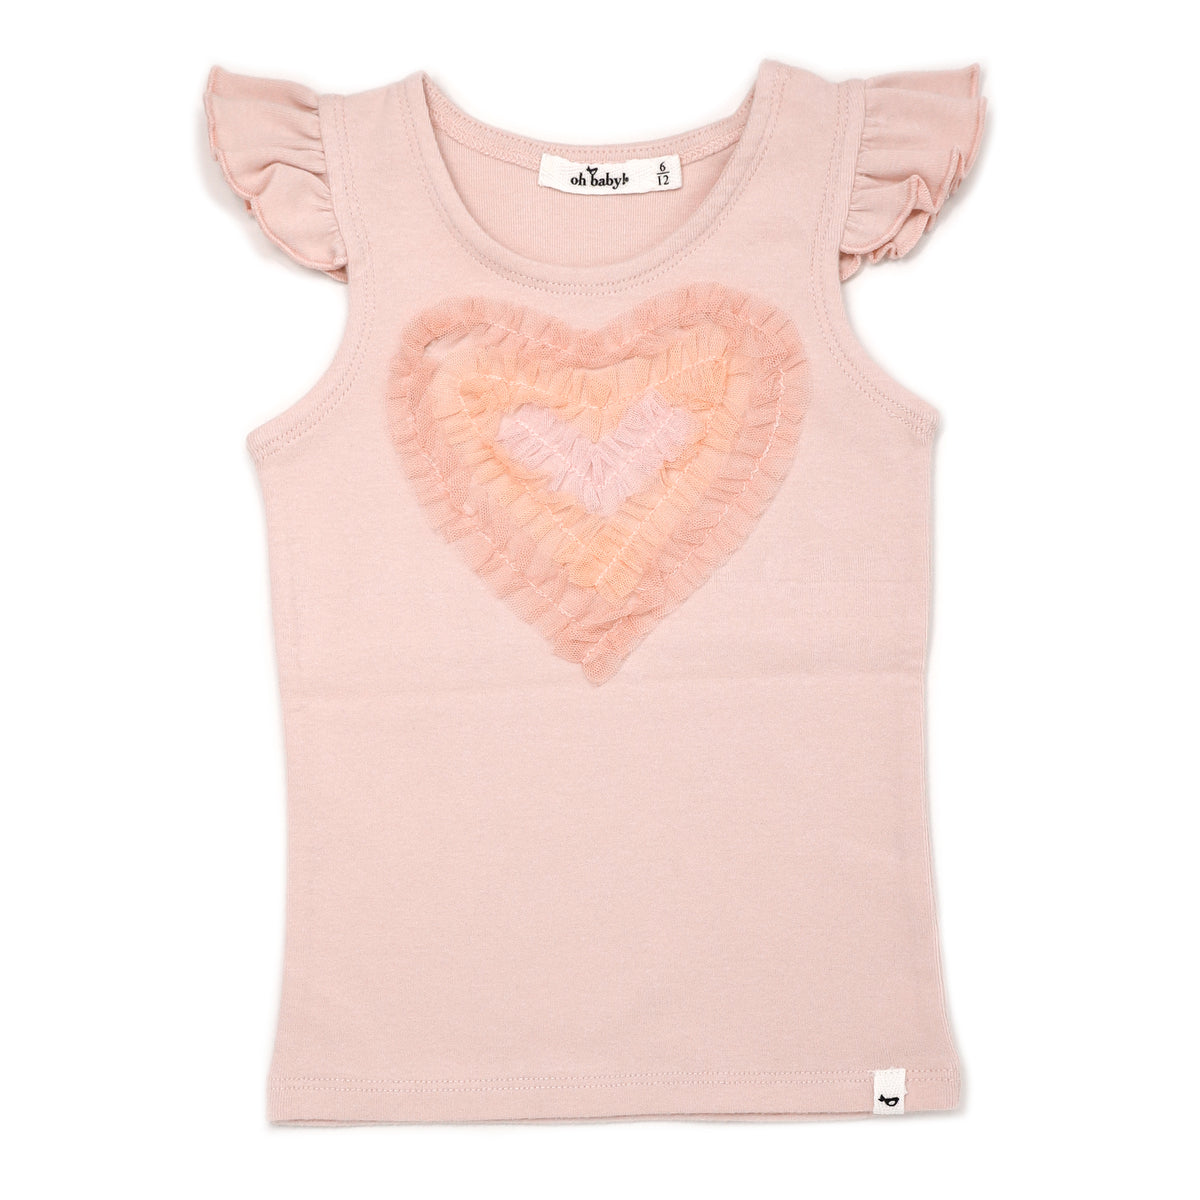 oh baby! Cotton Flutter Tank - Tulle Pastel Rainbow Heart - Pale Pink